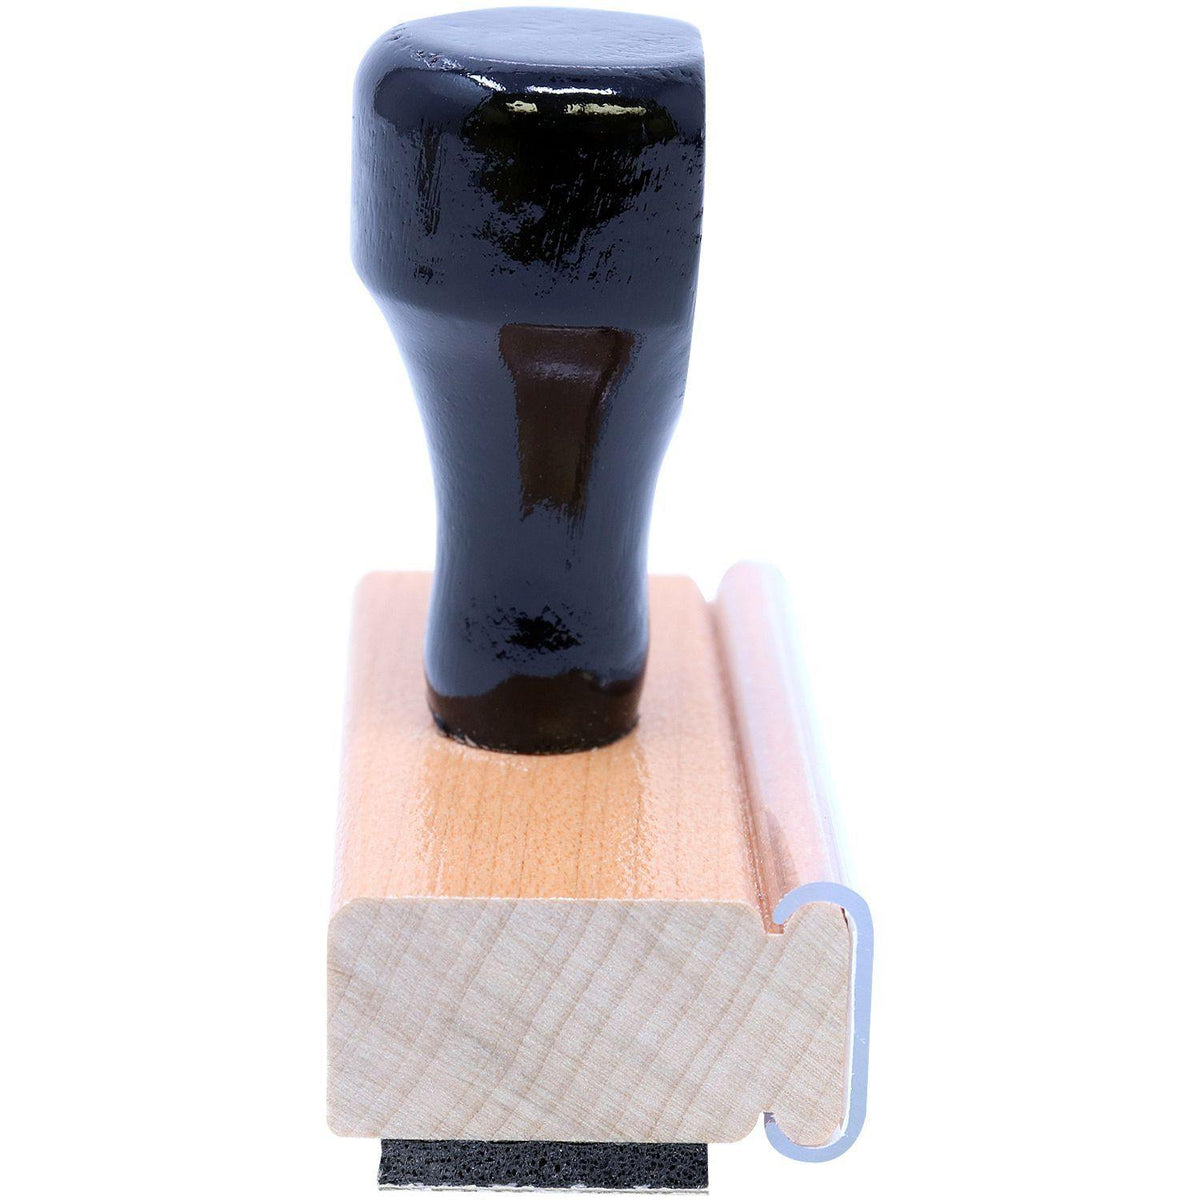 Refinance Rubber Stamp - Engineer Seal Stamps - Brand_Acorn, Impression Size_Small, Stamp Type_Regular Stamp, Type of Use_Finance